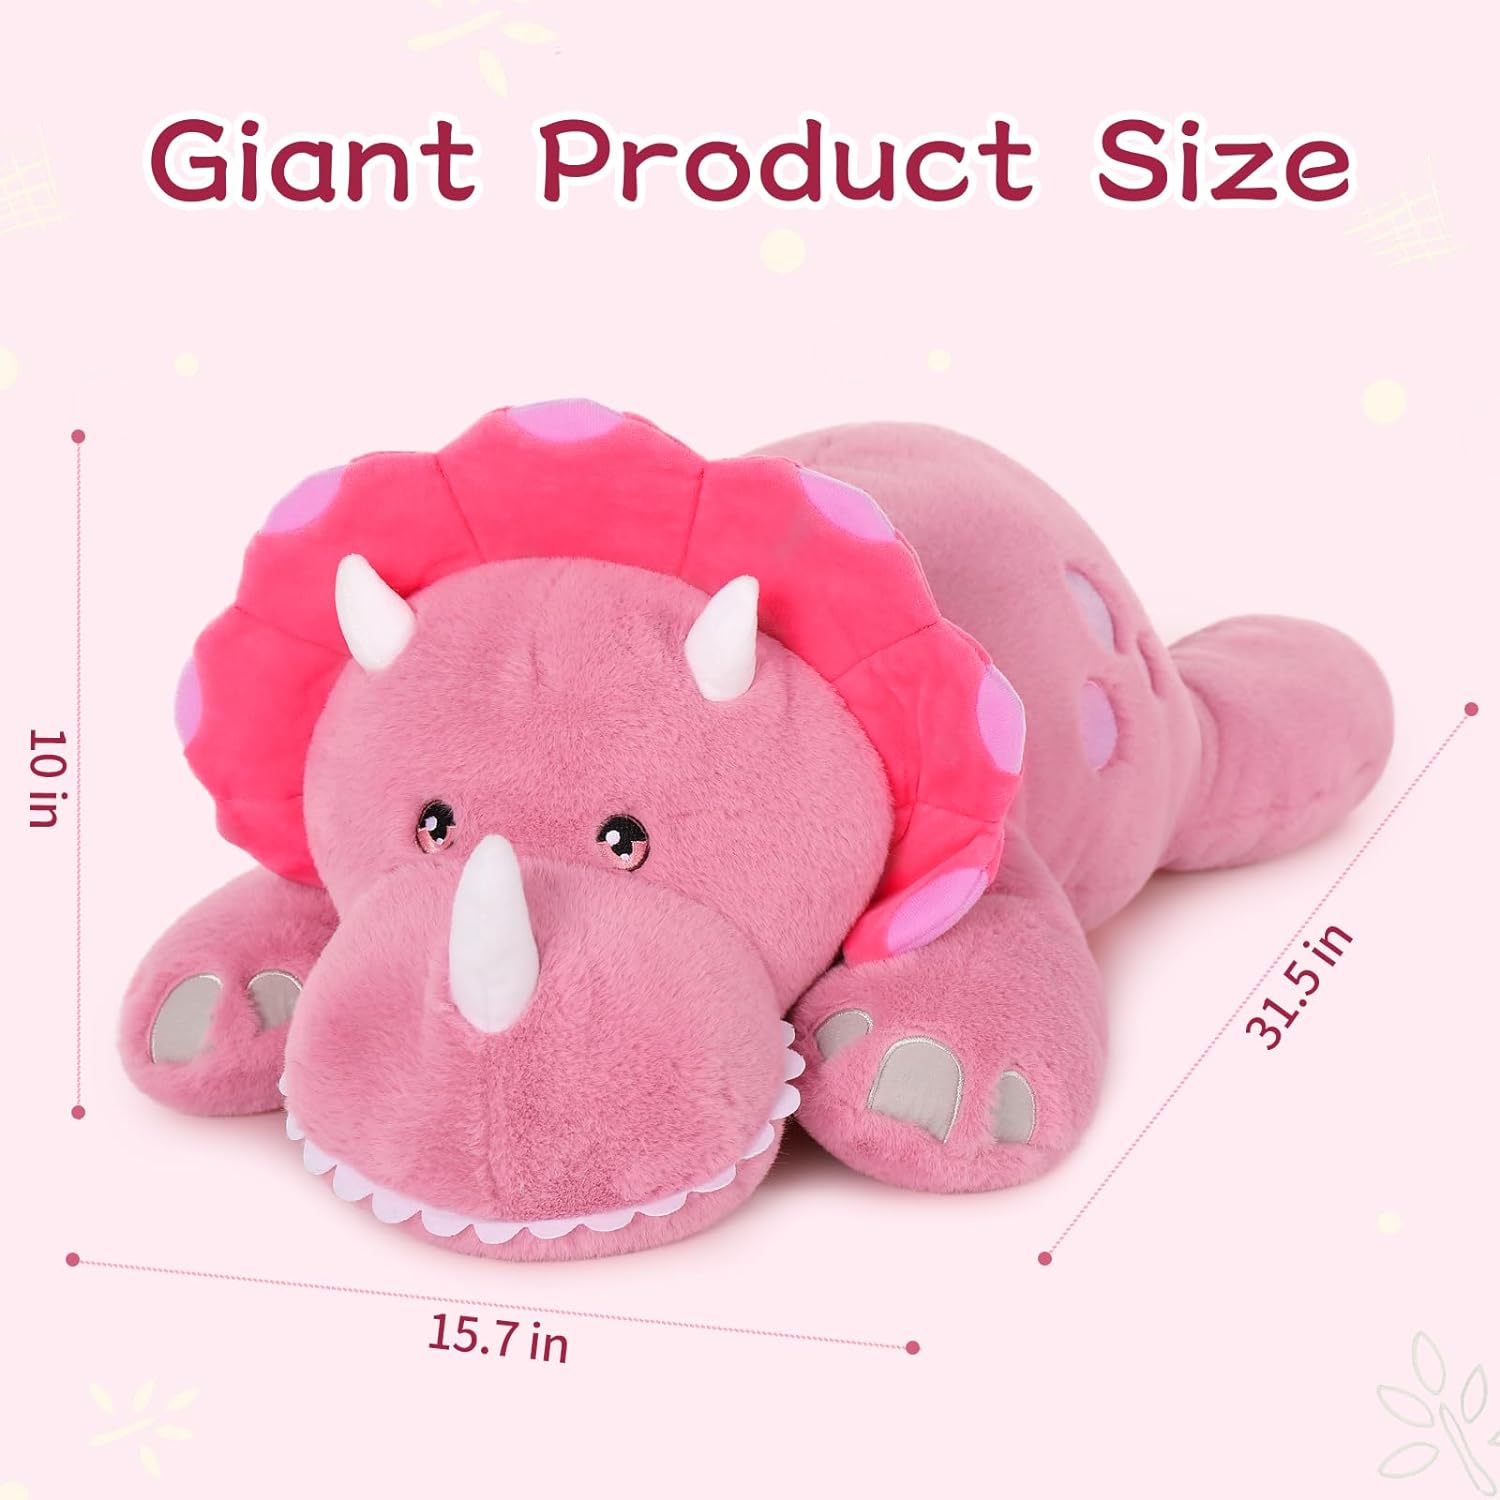 Triceratops Glow-in-the-dark Weighted Plush Toy, Pink, 31.5 Inches